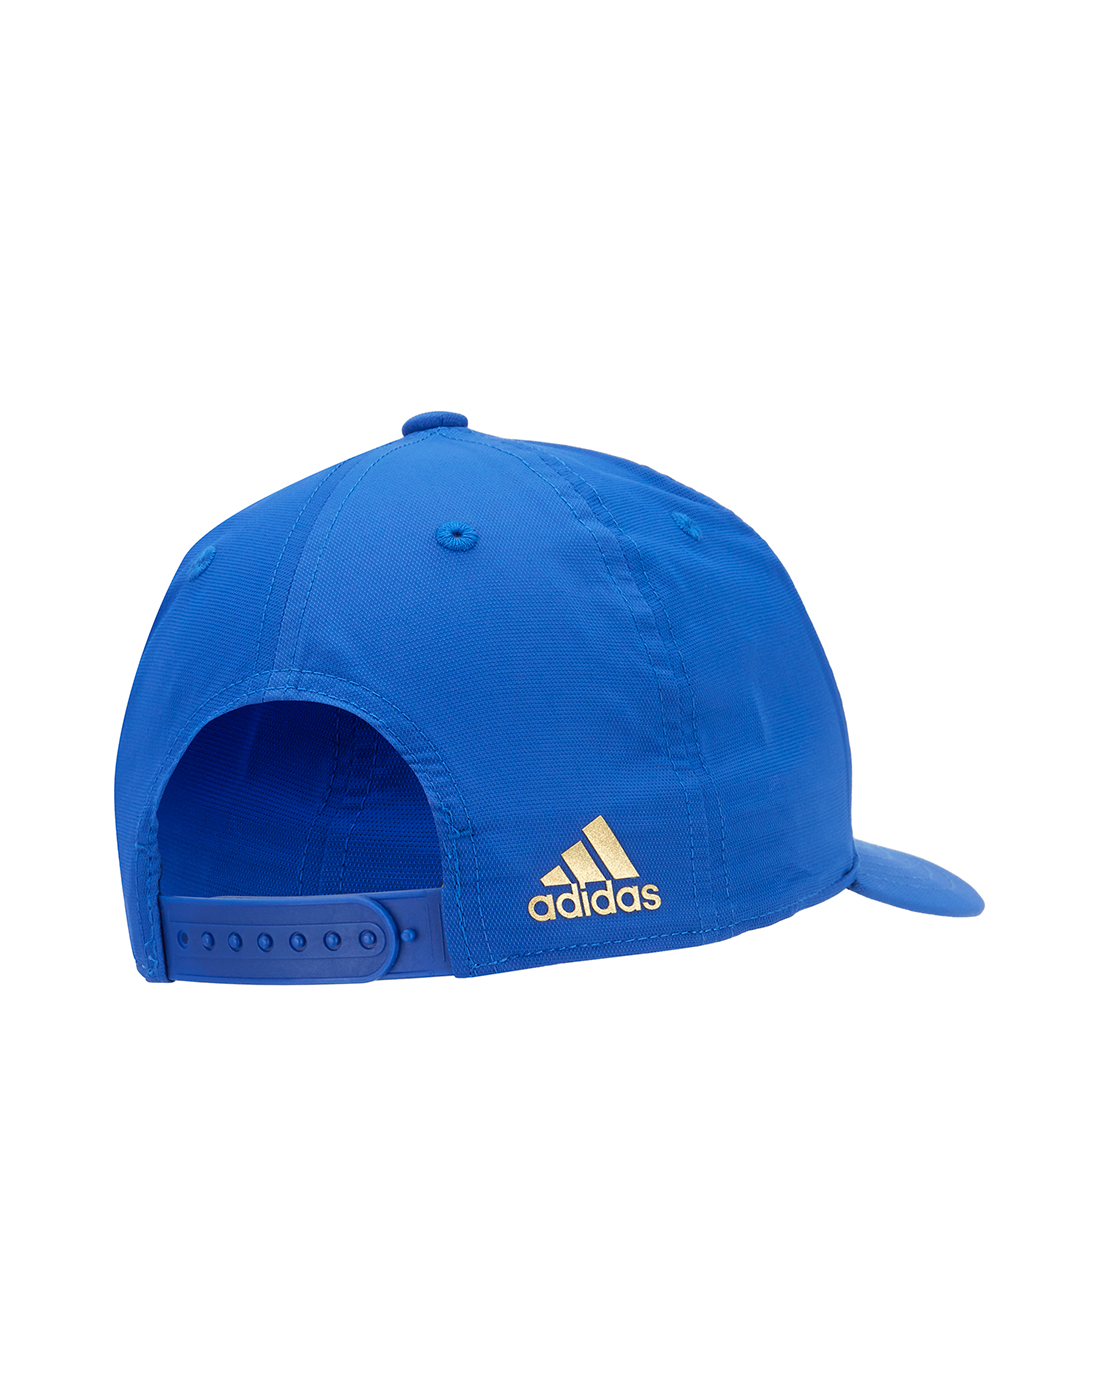 adidas Leinster Supporters Cap - Blue | Life Style Sports IE